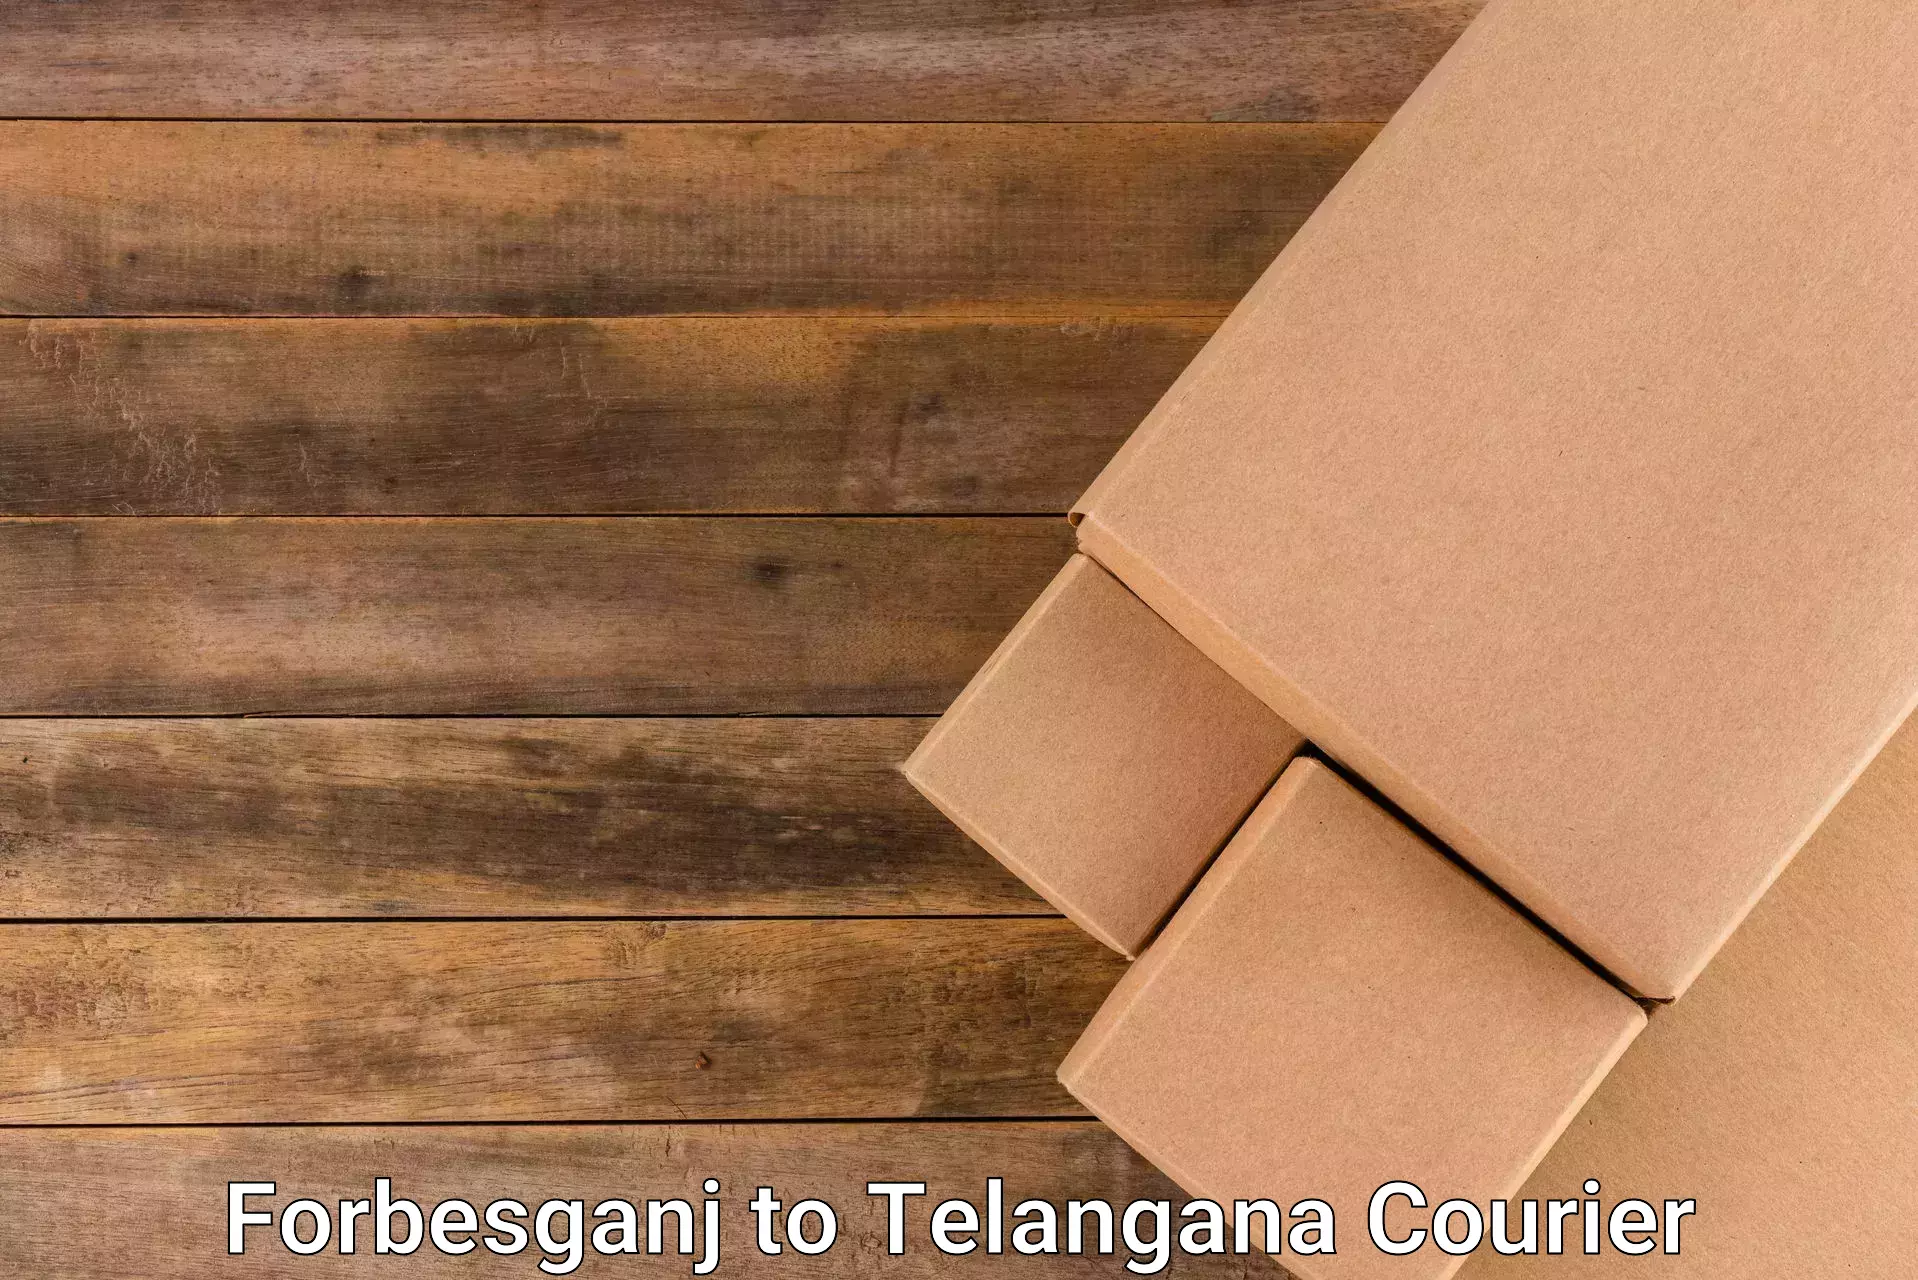 Subscription-based courier Forbesganj to Madgulapally